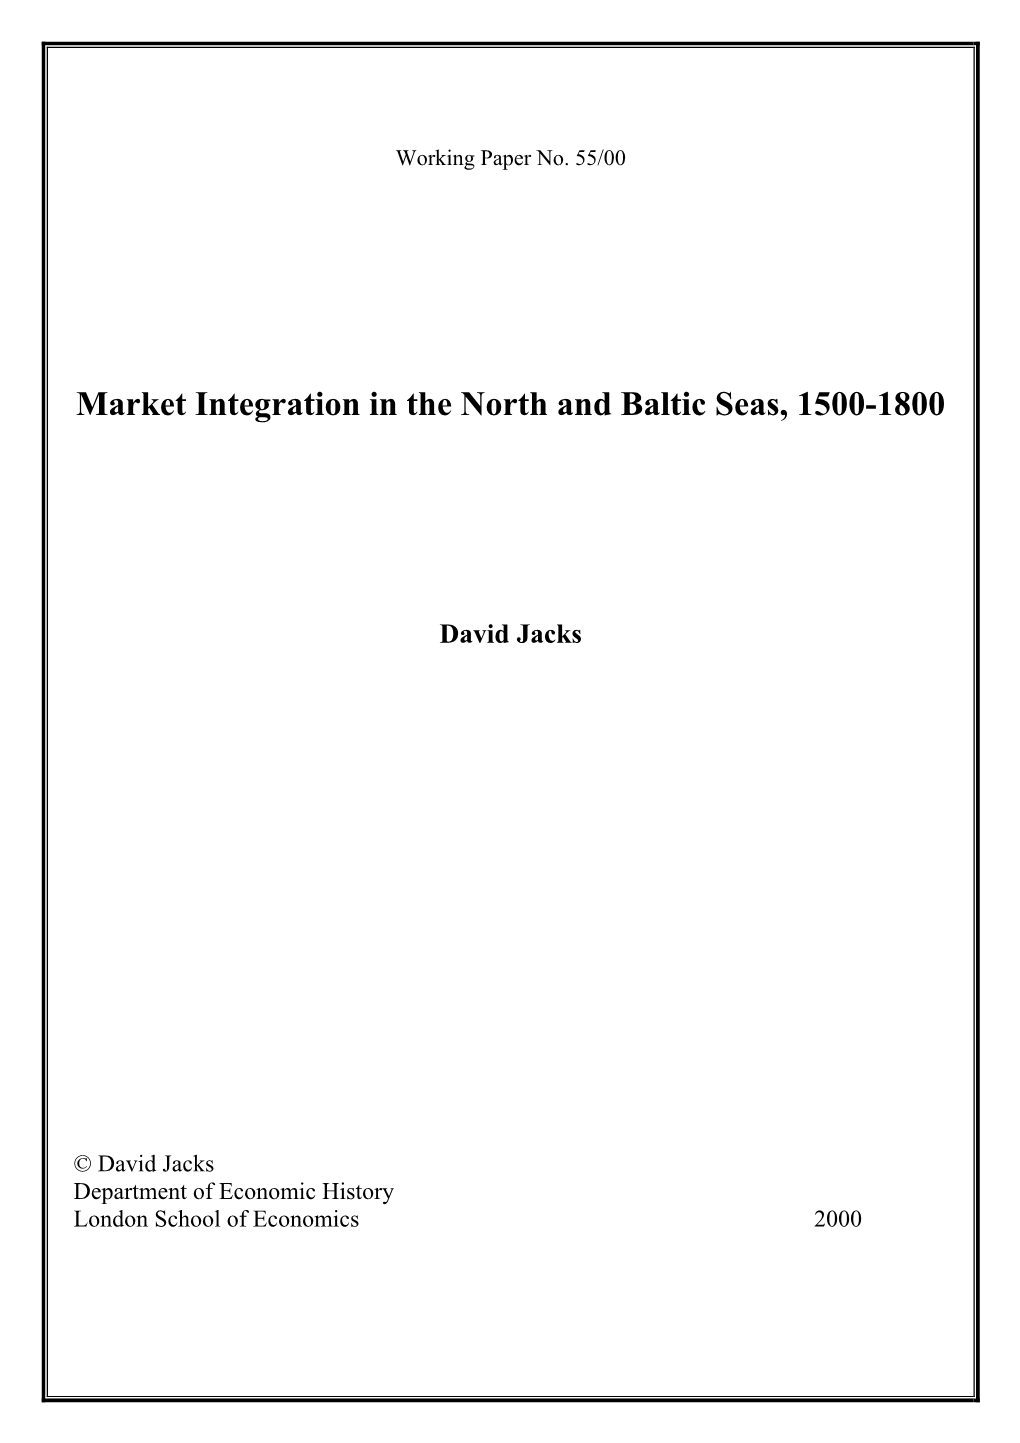 Market Integration in the North and Baltic Seas, 1500-1800